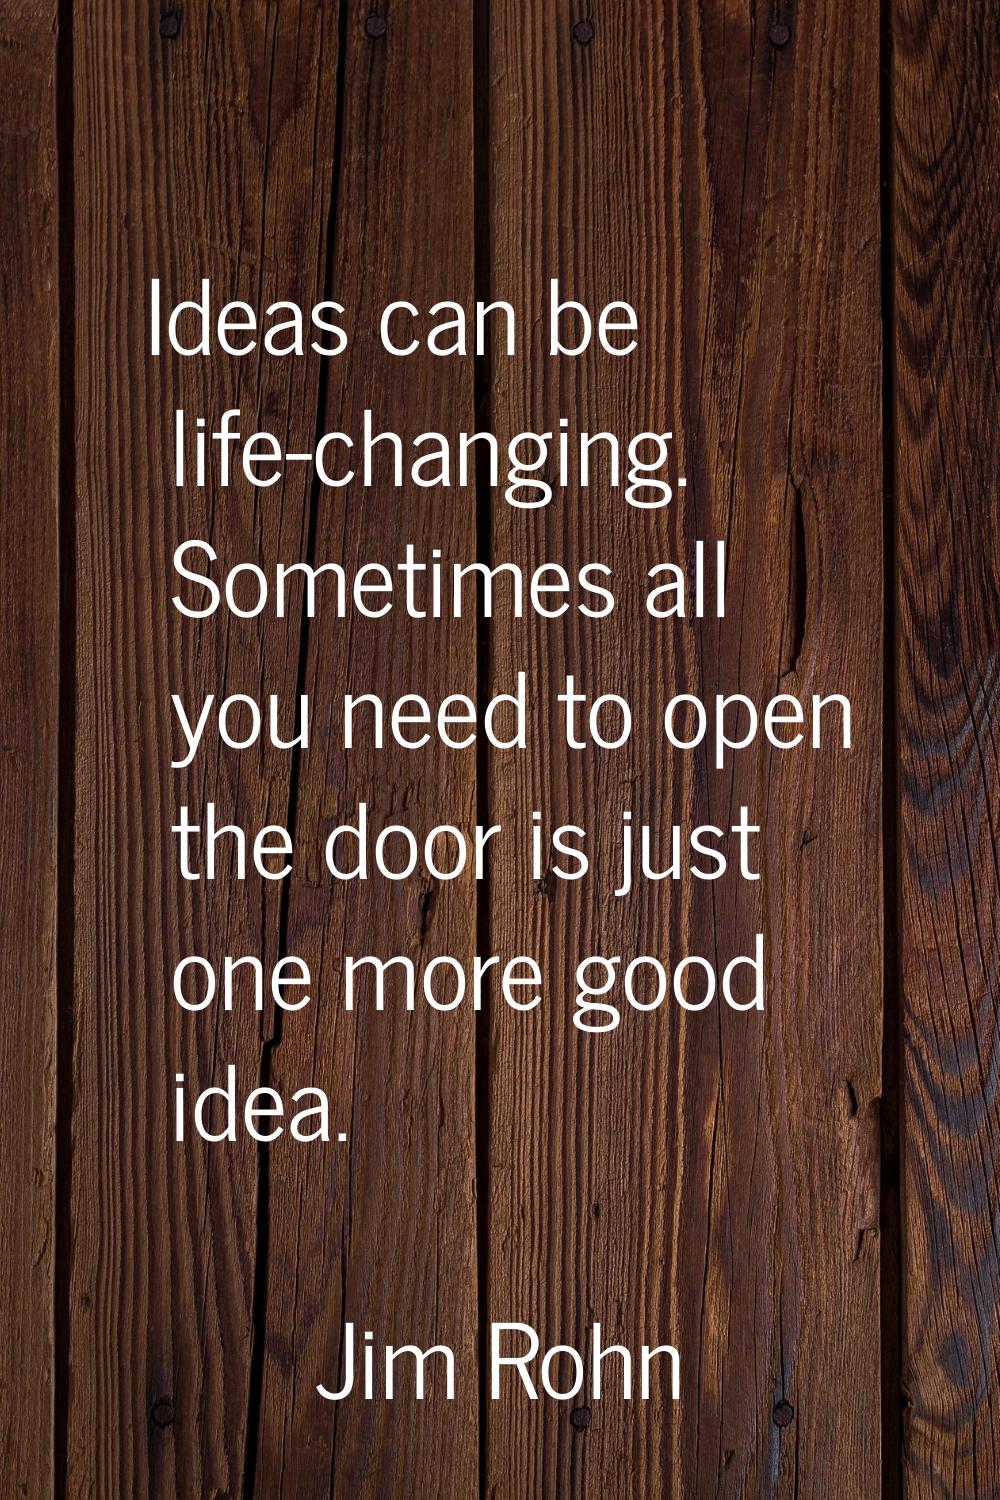 Ideas can be life-changing. Sometimes all you need to open the door is just one more good idea.